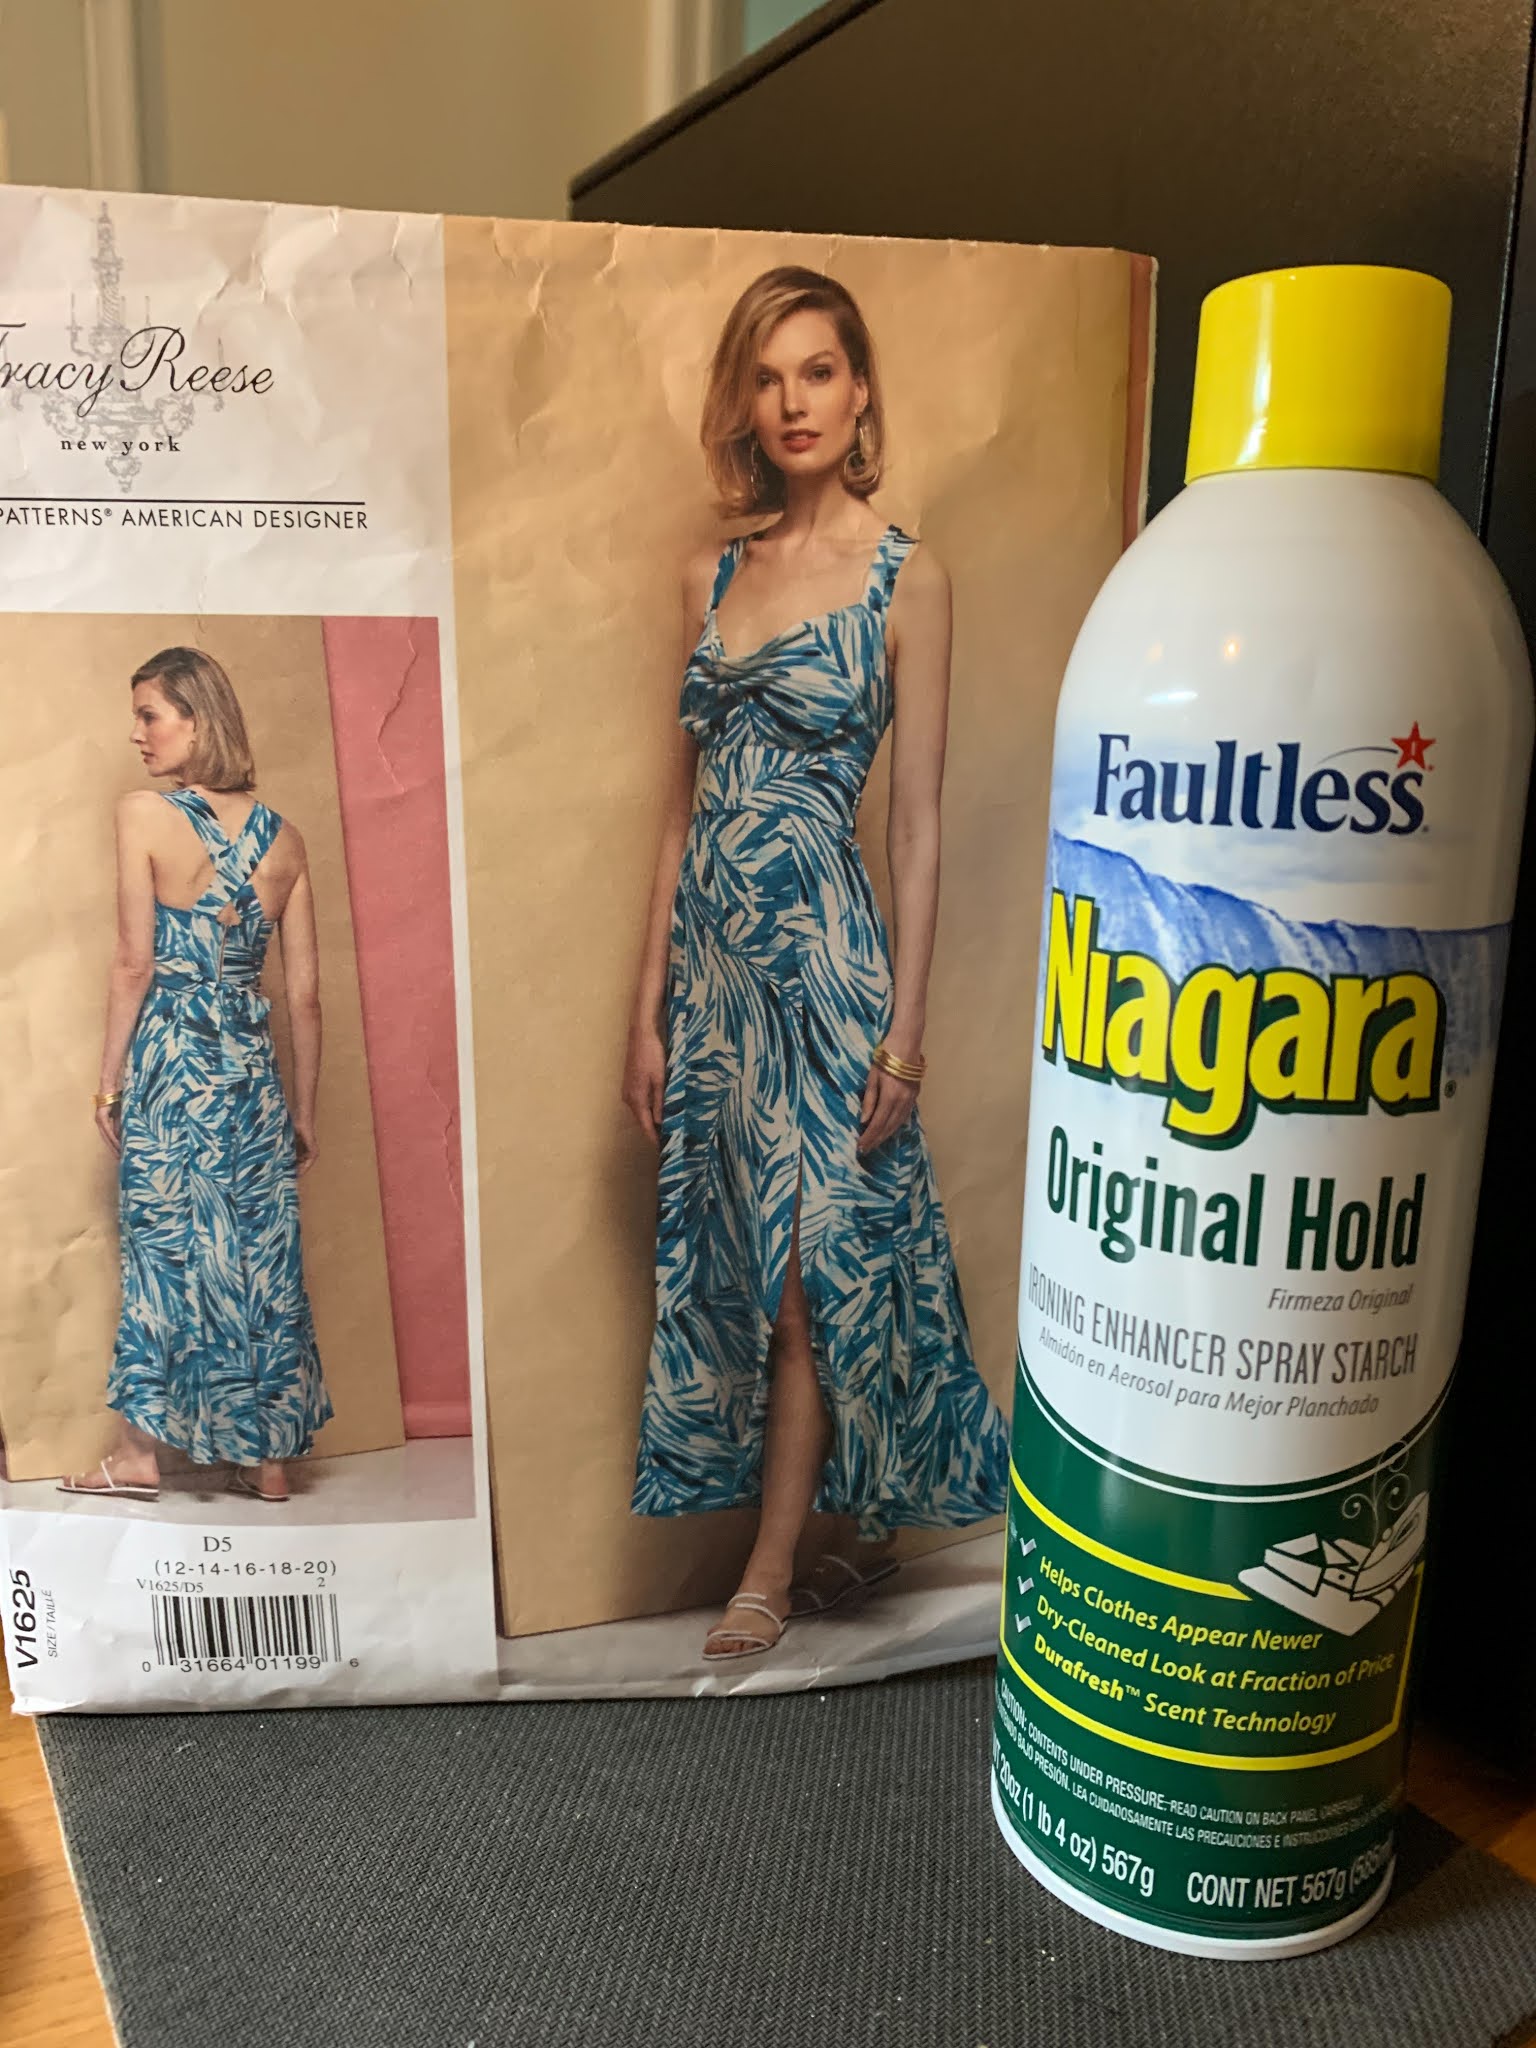 Made by a Fabricista: Updating My Summer Wardrobe